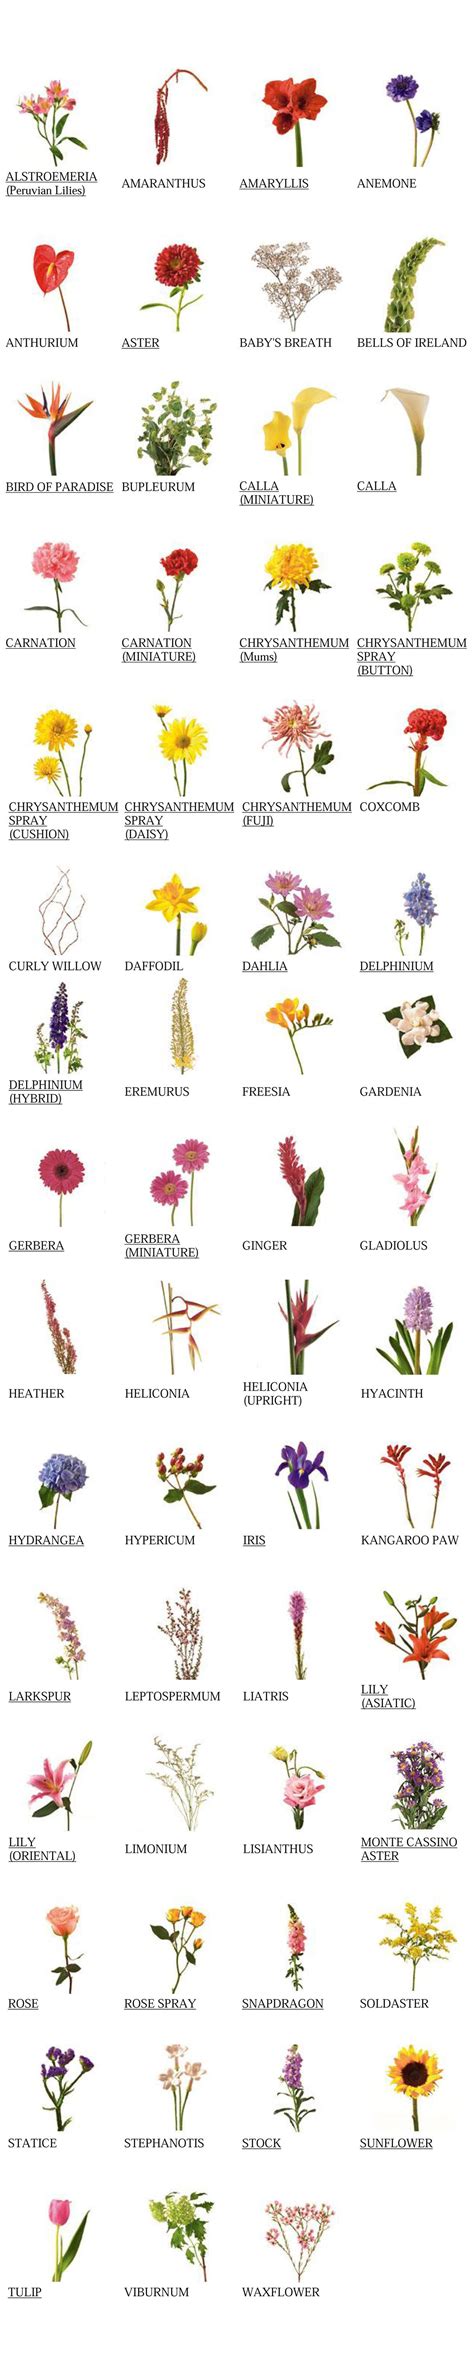 Having both systems allows us to properly name and identify a flower, no matter what region flower names come from the scientific convention. flower glossary | Flower names, Types of flowers, Amazing ...